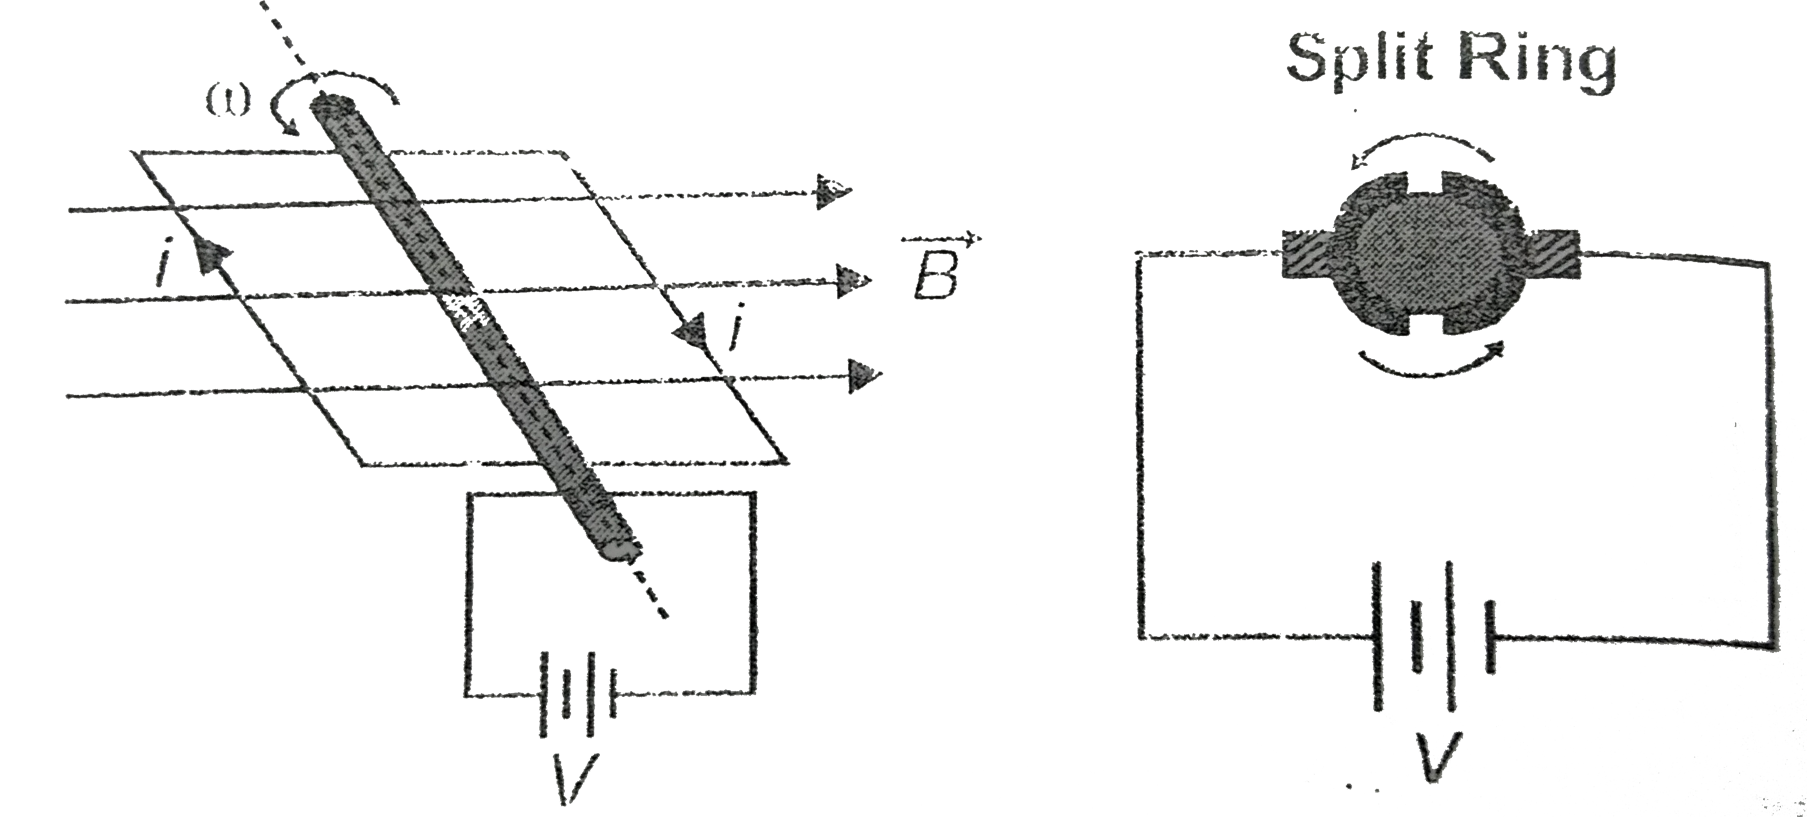 A dc motor works on the principle that a current carrying coil, when placed in a magnetic field experiences a torque. The arrangement consists of a coil suspended in a region of magnetic field. When a current is passed through the coil, it experiences torque and starts rotating. A simple arrangement is shown below.      The coil rotates under the action of torque. The current is supplied to the coil by an arrangement of two sliding contacts and a split ring. As the coil rotates, the magnetic flux linked with the coil changes. This leads to production of an induced emf epsilon in the coil. By Lenz's law, the induced emf opposes the applied voltage and therefore, it is called back emf. If R is the resistance in the coil, the current i flowing through the coil at any instant is i=(V-epsilon)/(R). The back emf is developed due to induction and it is directly proportional to speed of rotation and it is directly proportional to speed of rotation of the motor. There is a continuous power loss i^(2)R in the motor, in form of heat.   When a dc motor is running unloaded (full speed) the current through it is 1 A. What will be the current flowing through the motor, when it is loaded to run at half its maximum speed, it applied voltage is 10 V and armature resistance is 5 Omega